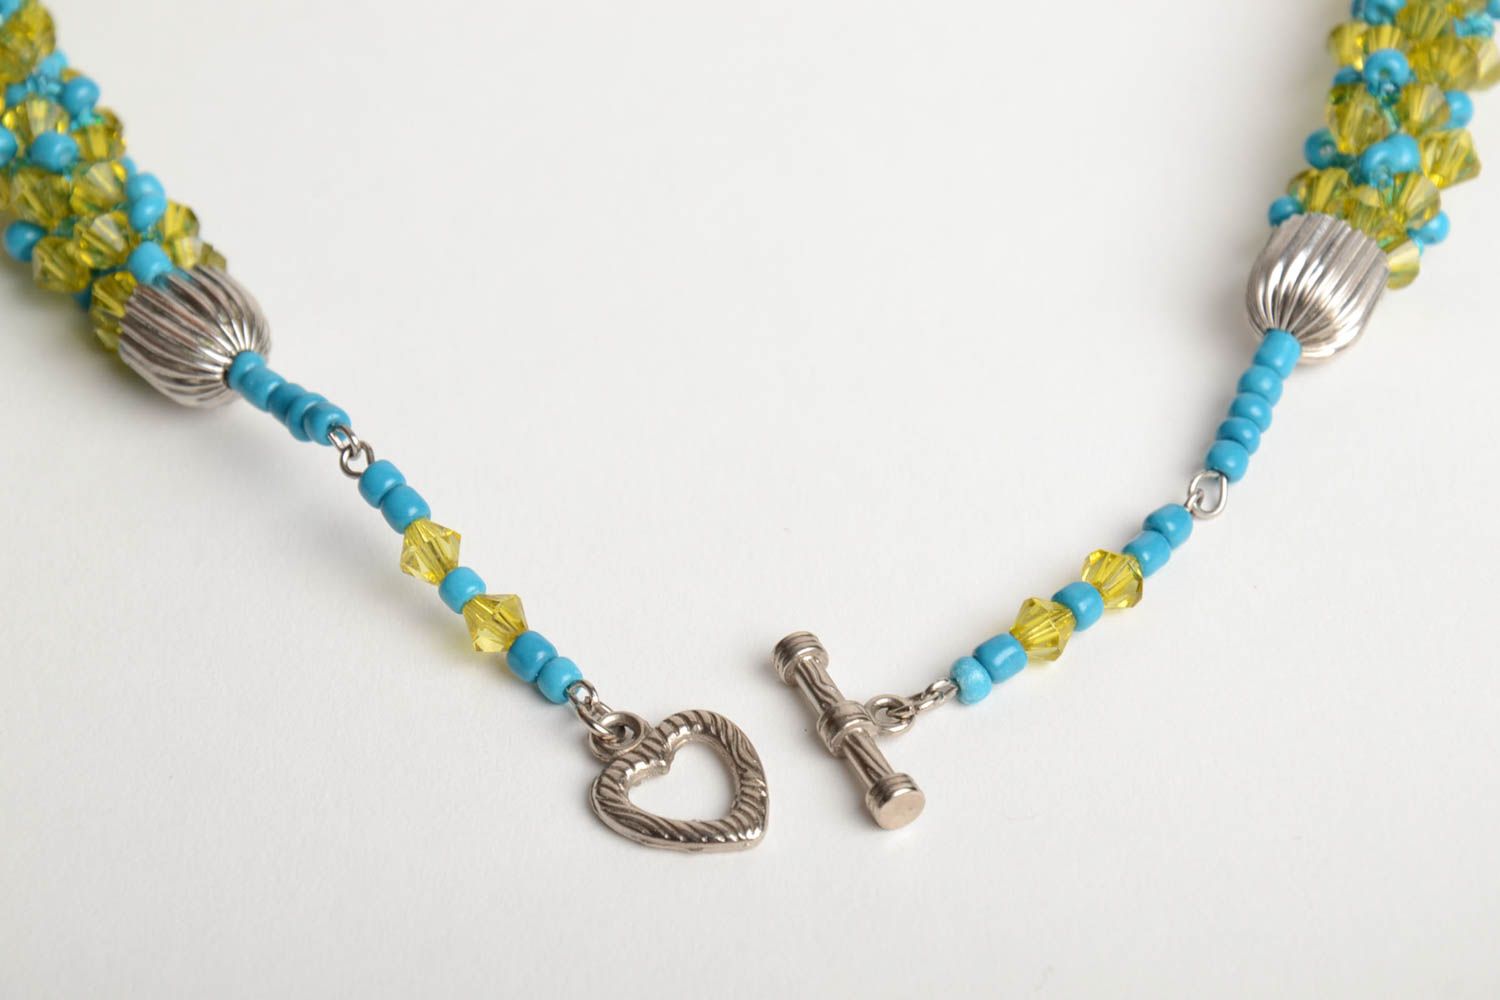 Handmade thin necklace crocheted of Czech beads in blue and yellow colors photo 4